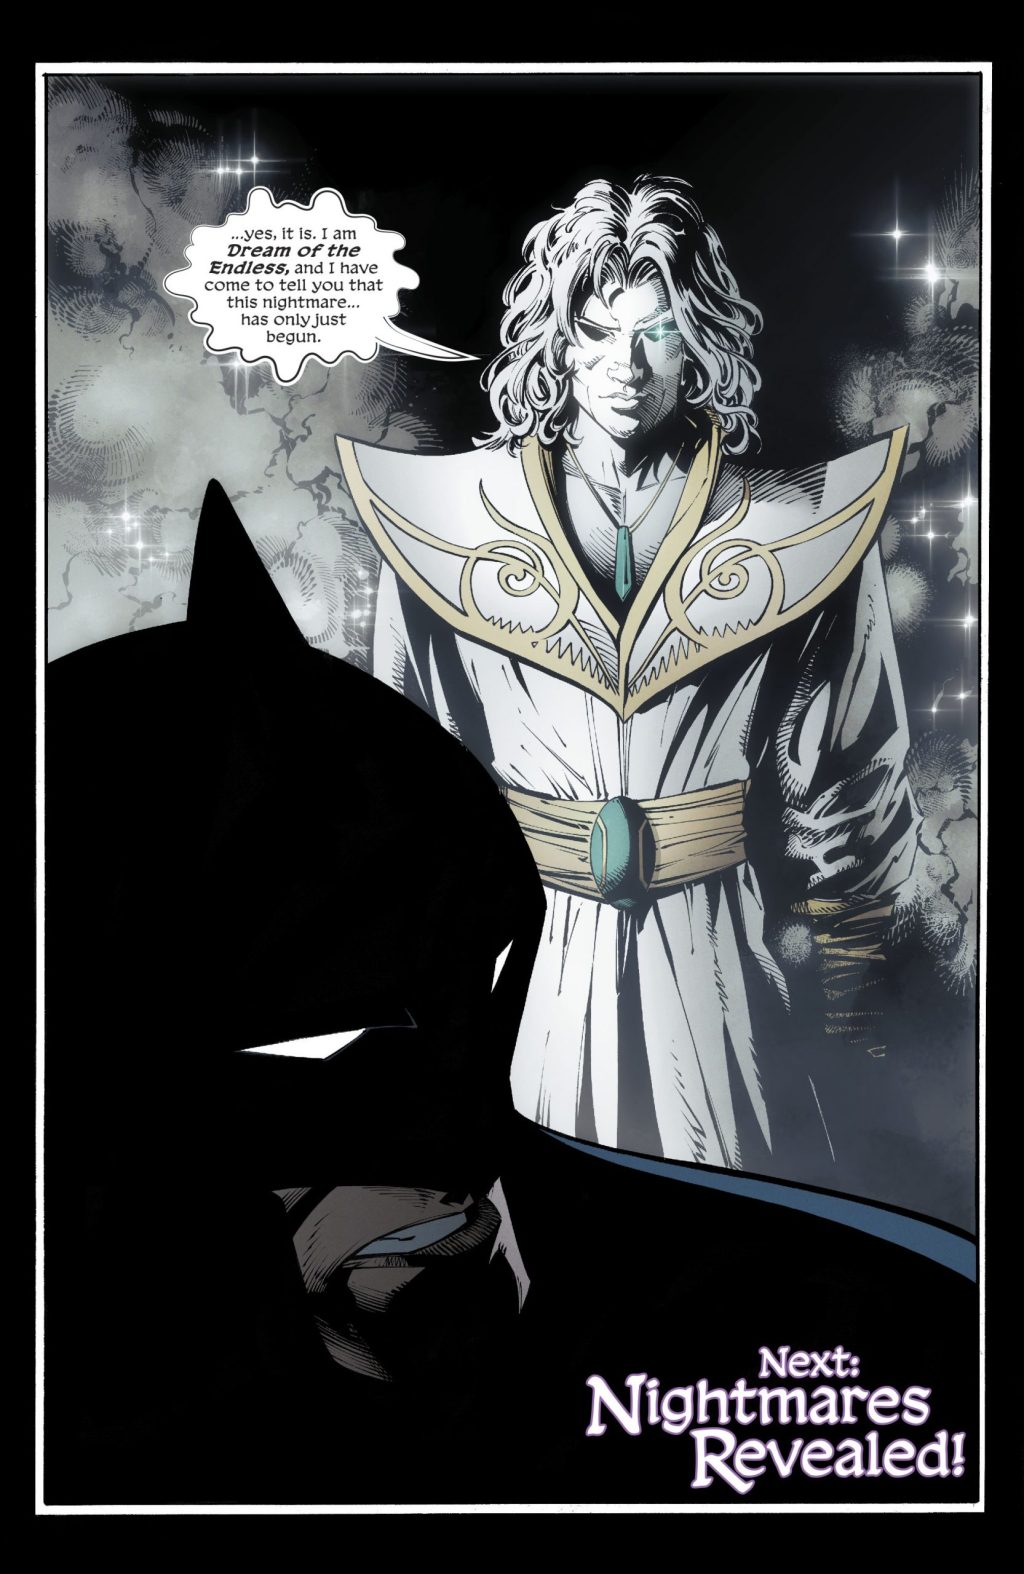 Dream introduces himself to Batmanin Dark Knights - Metal Vol. 1 #1 (2017), DC. Words by Scott Snyder, art by Greg Capullo, Jonathan Glapion, FCO Plascencia, and Steve Wands.